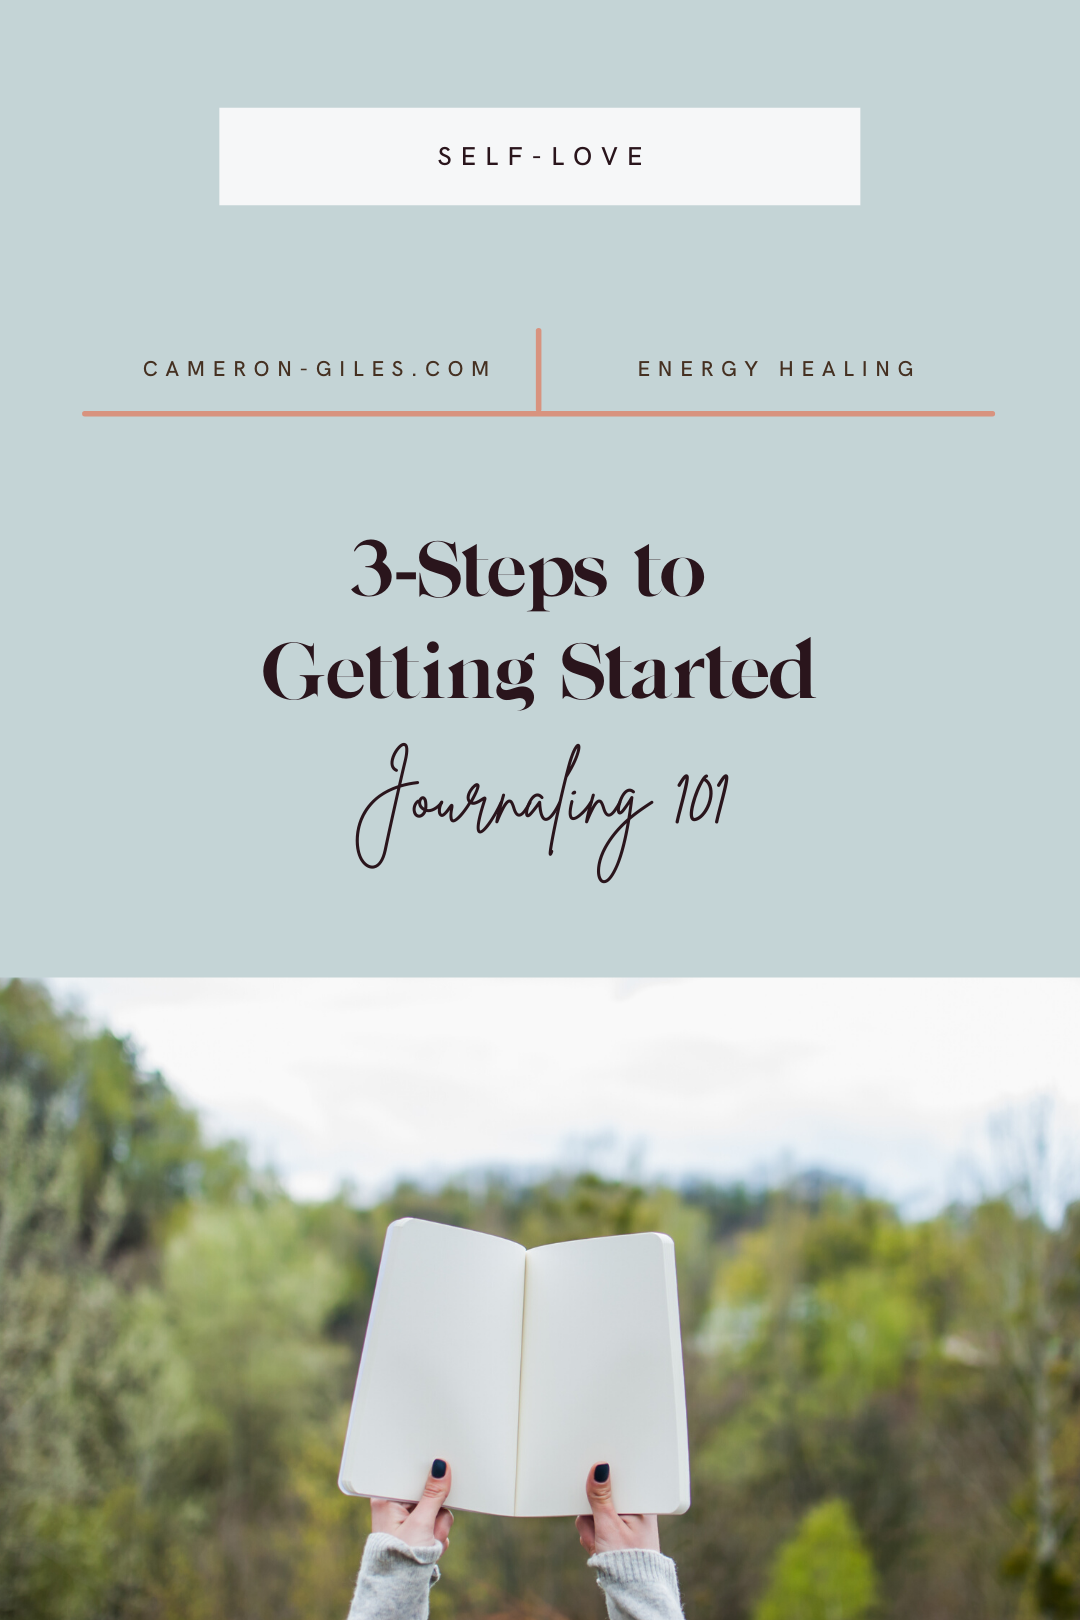 Journaling 101: 3-Steps to getting started